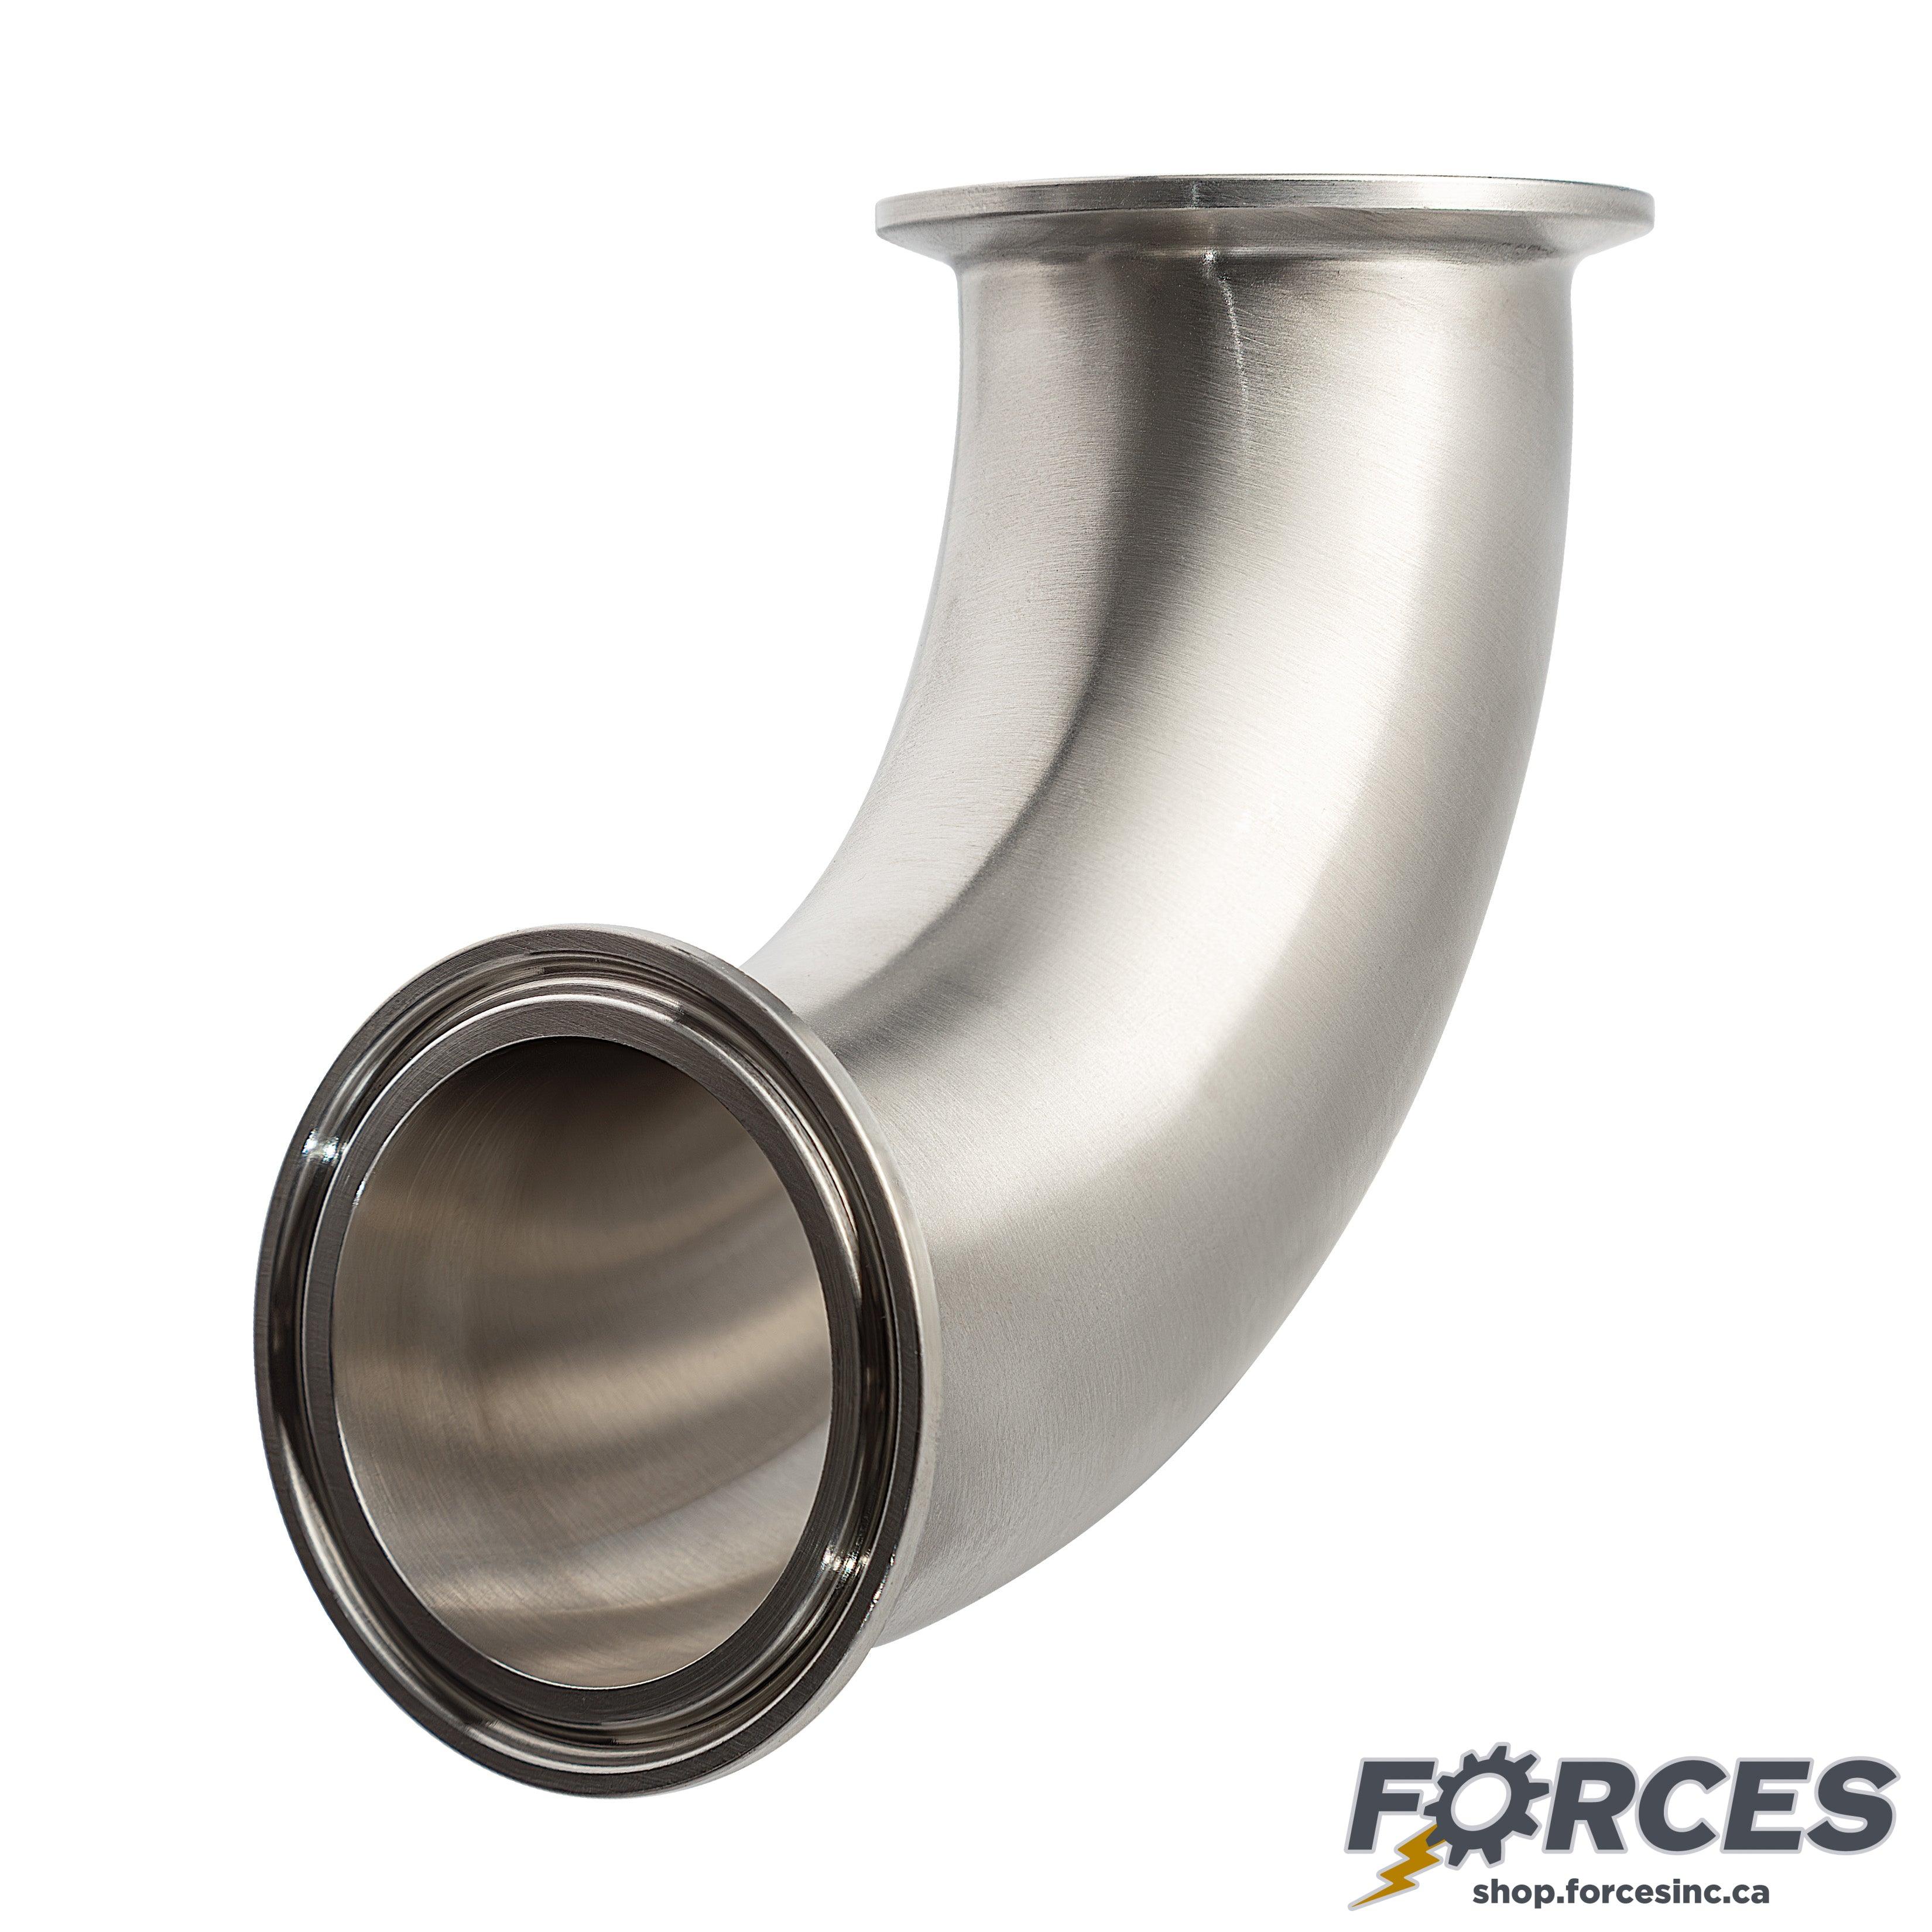 1-1/2" Tri-Clamp 90° Elbow - Stainless Steel 316 - Forces Inc